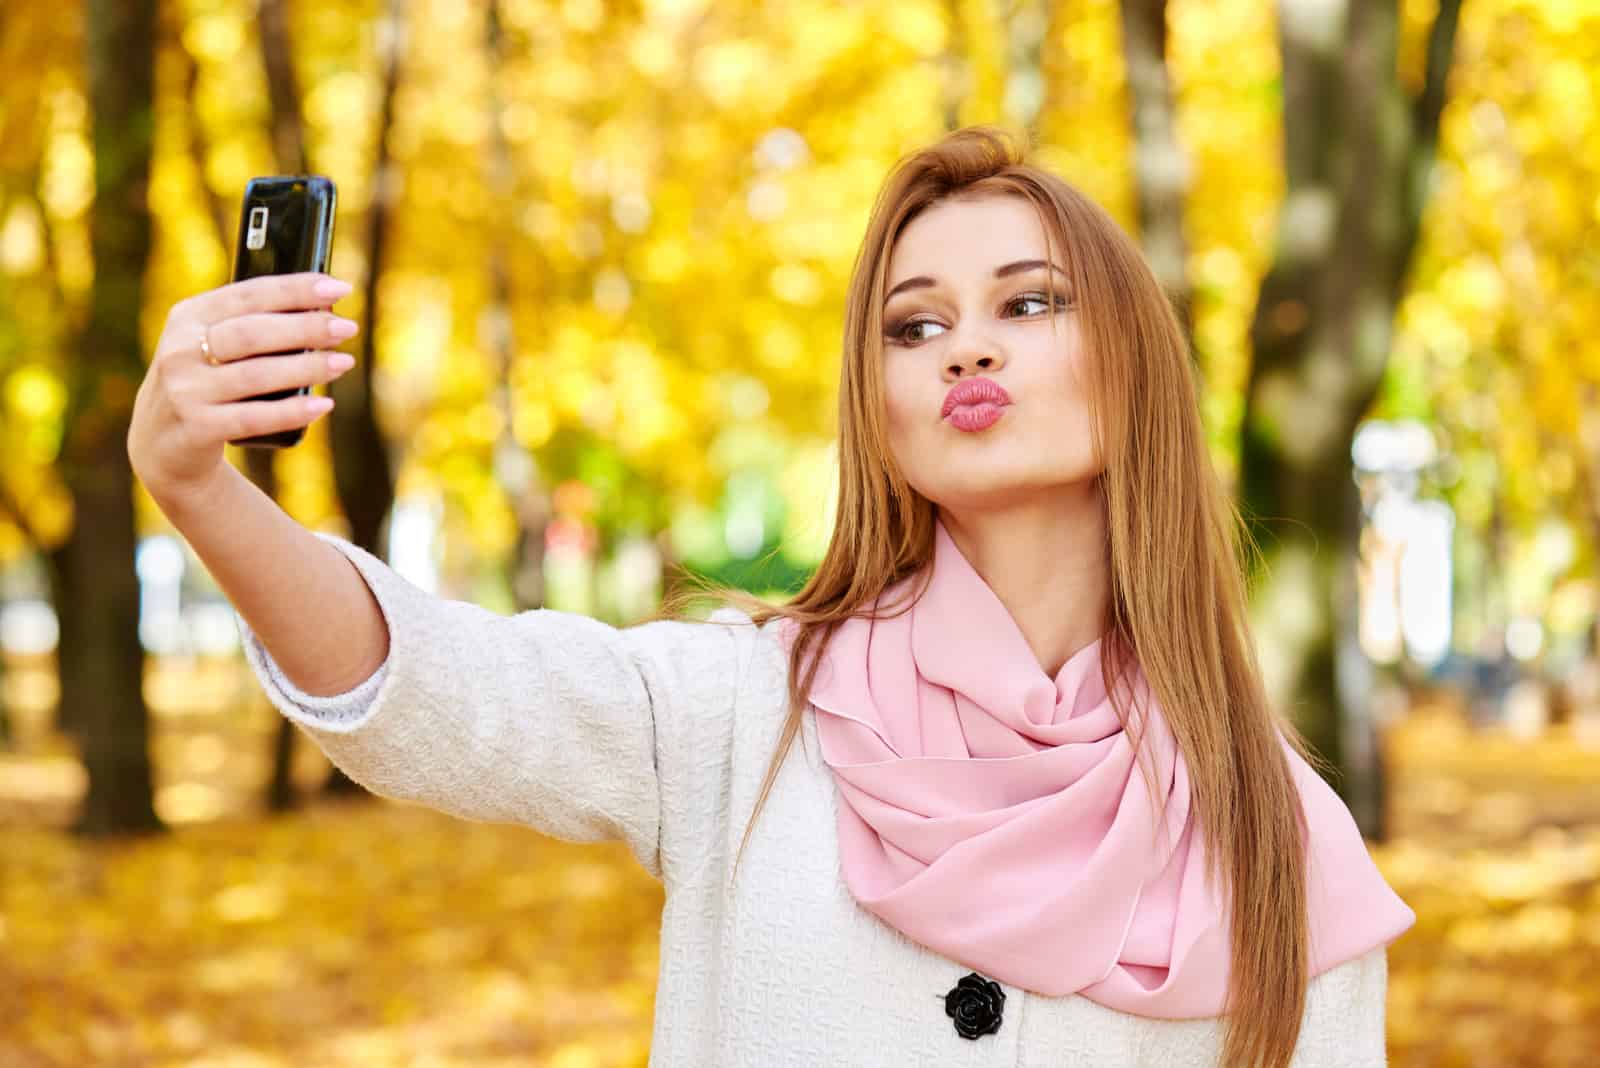 woman making a duckface while taking a selfie